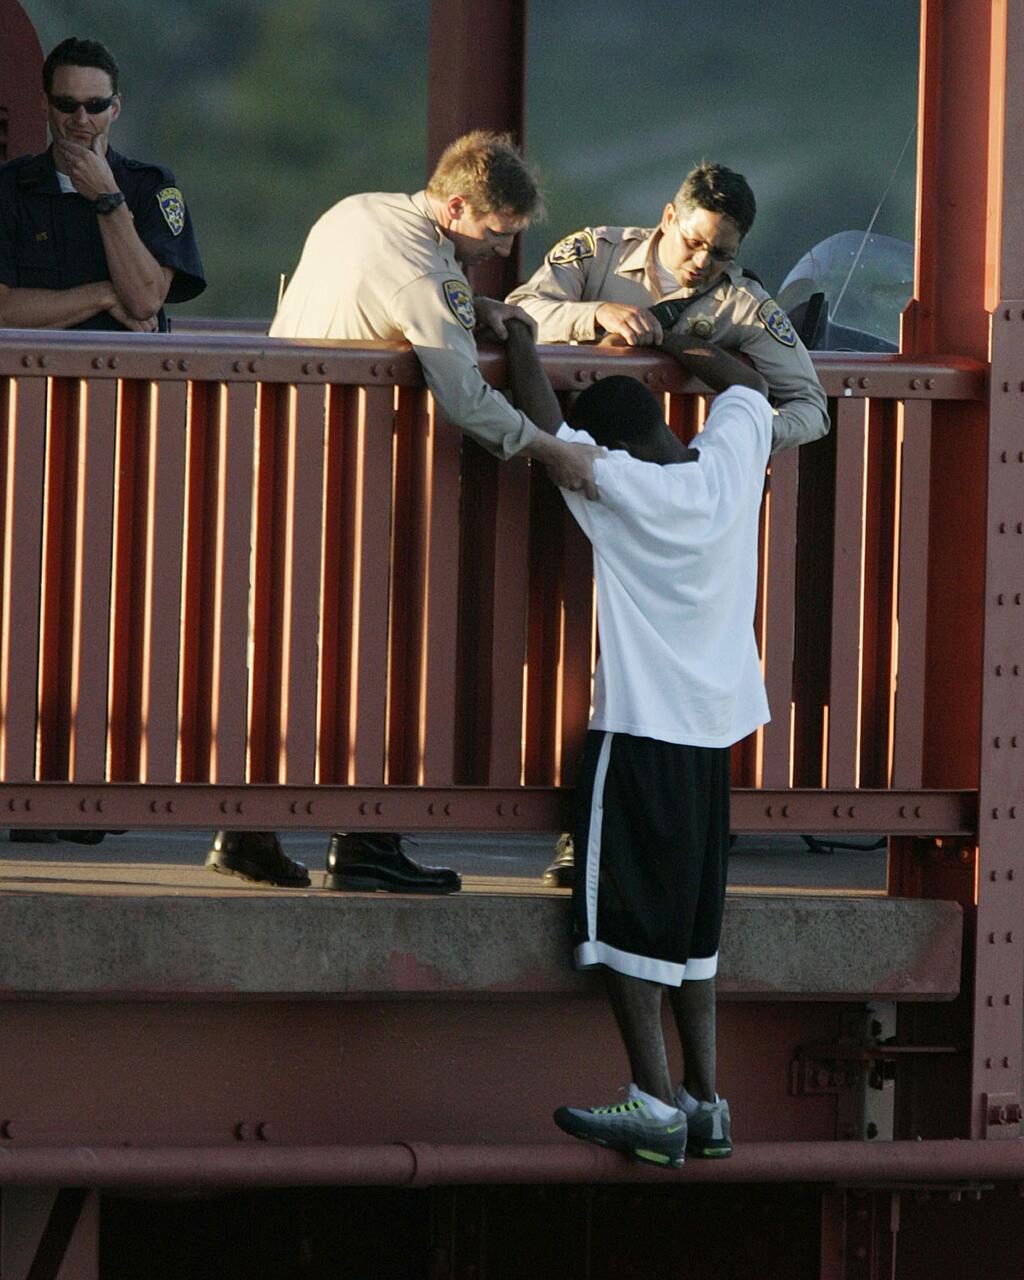 In this March 11, 2005 photo, Kevin Berthia is talked out of jumping off the Golden Gate Bridge and pulled to safety by California Highway Patrolman Kevin Briggs, center, in San Francisco. During his 20 years patrolling the bridge Briggs has managed to talk may despondent people out of taking the fatal fall. On May 8, 2013 the American Foundation for Suicide Prevention will be honoring Sgt. Briggs with their prestigious Public Service Award at an annual Lifesavers dinner in New York City. Berthia has been asked to present Briggs with the award. They have not seen each other since that day, nor has Mr. Berthia had a chance to thank Sgt. Briggs for saving his life. (AP Photo/The San Francisco Chronicle, John Storey)